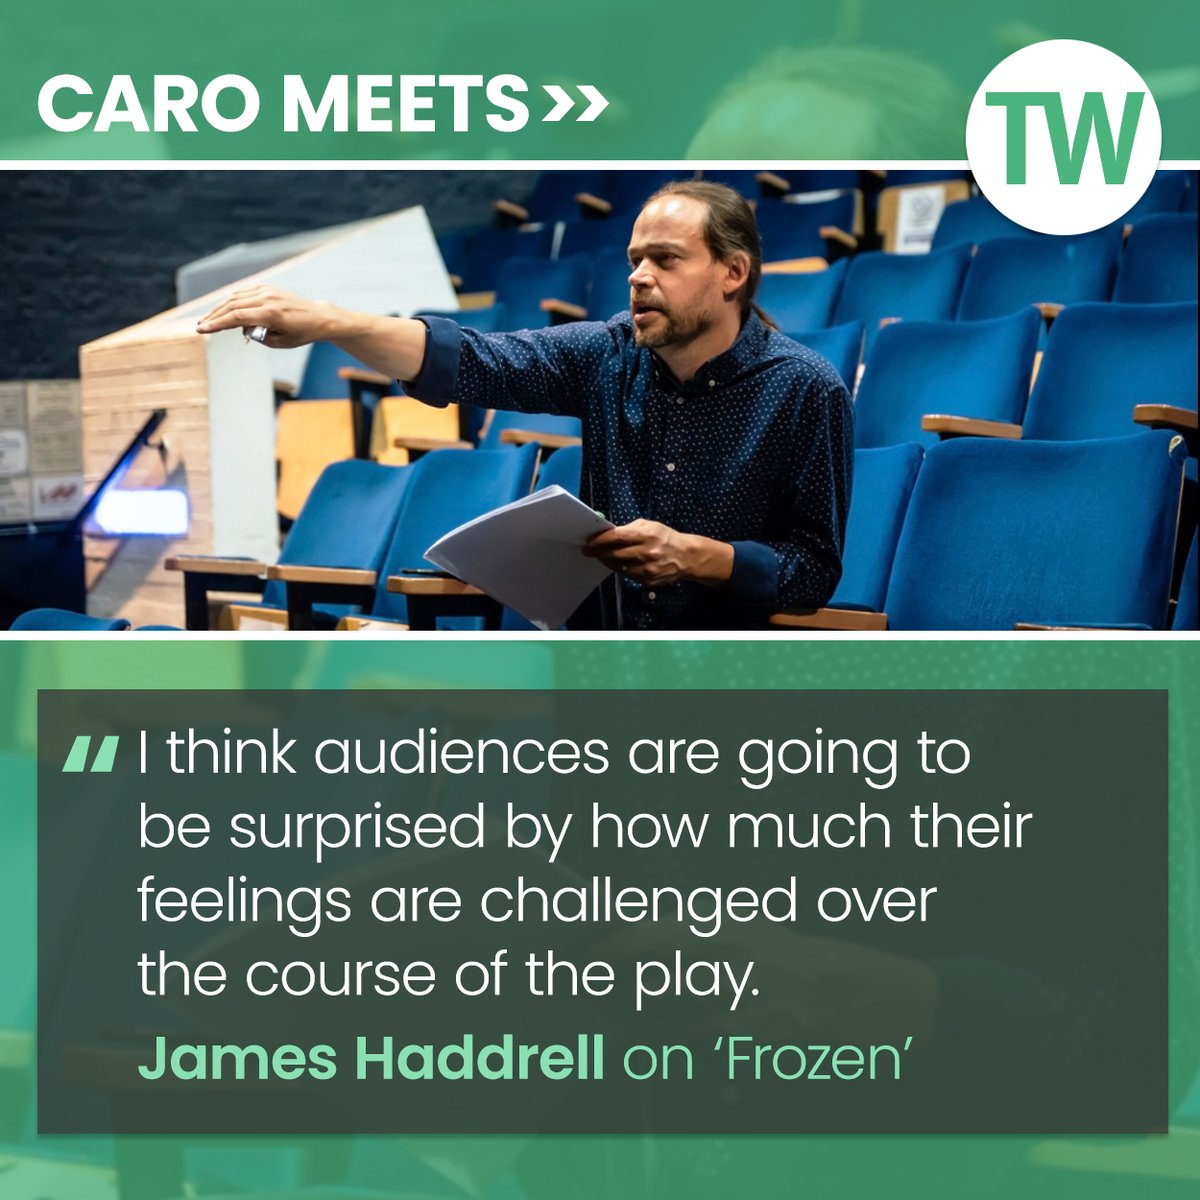 This week Caro Meets James Haddrell, Artistic Director of Greenwich Theatre, to discuss his production of Bryony Lavery’s ‘Frozen’, which begins its run today: bit.ly/44o4TsE @GreenwichTheatr @jameshaddrell